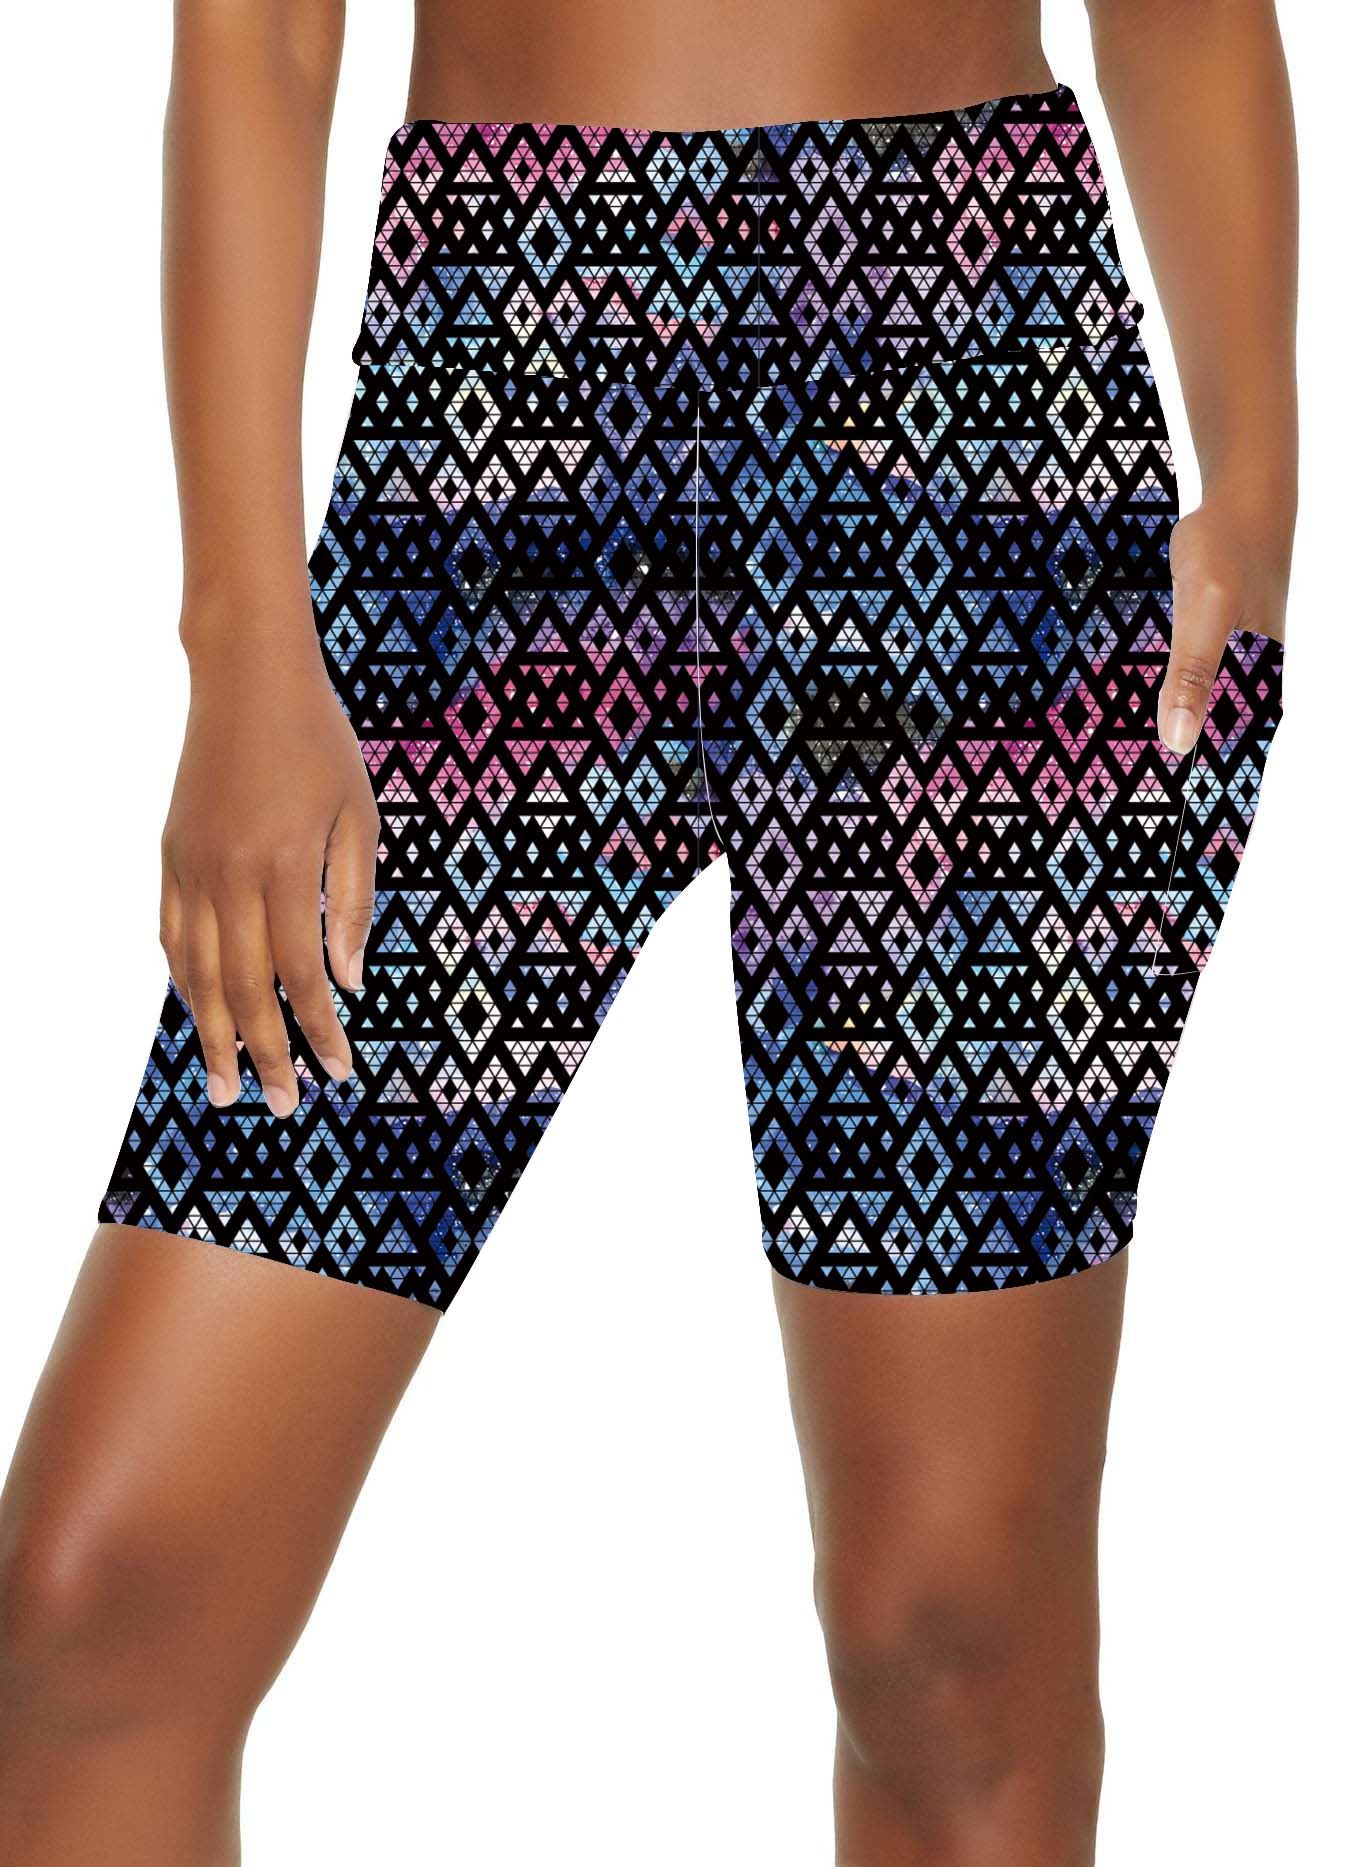 PLUS SIZE PATTERNED BIKE SHORTS WITH POCKETS